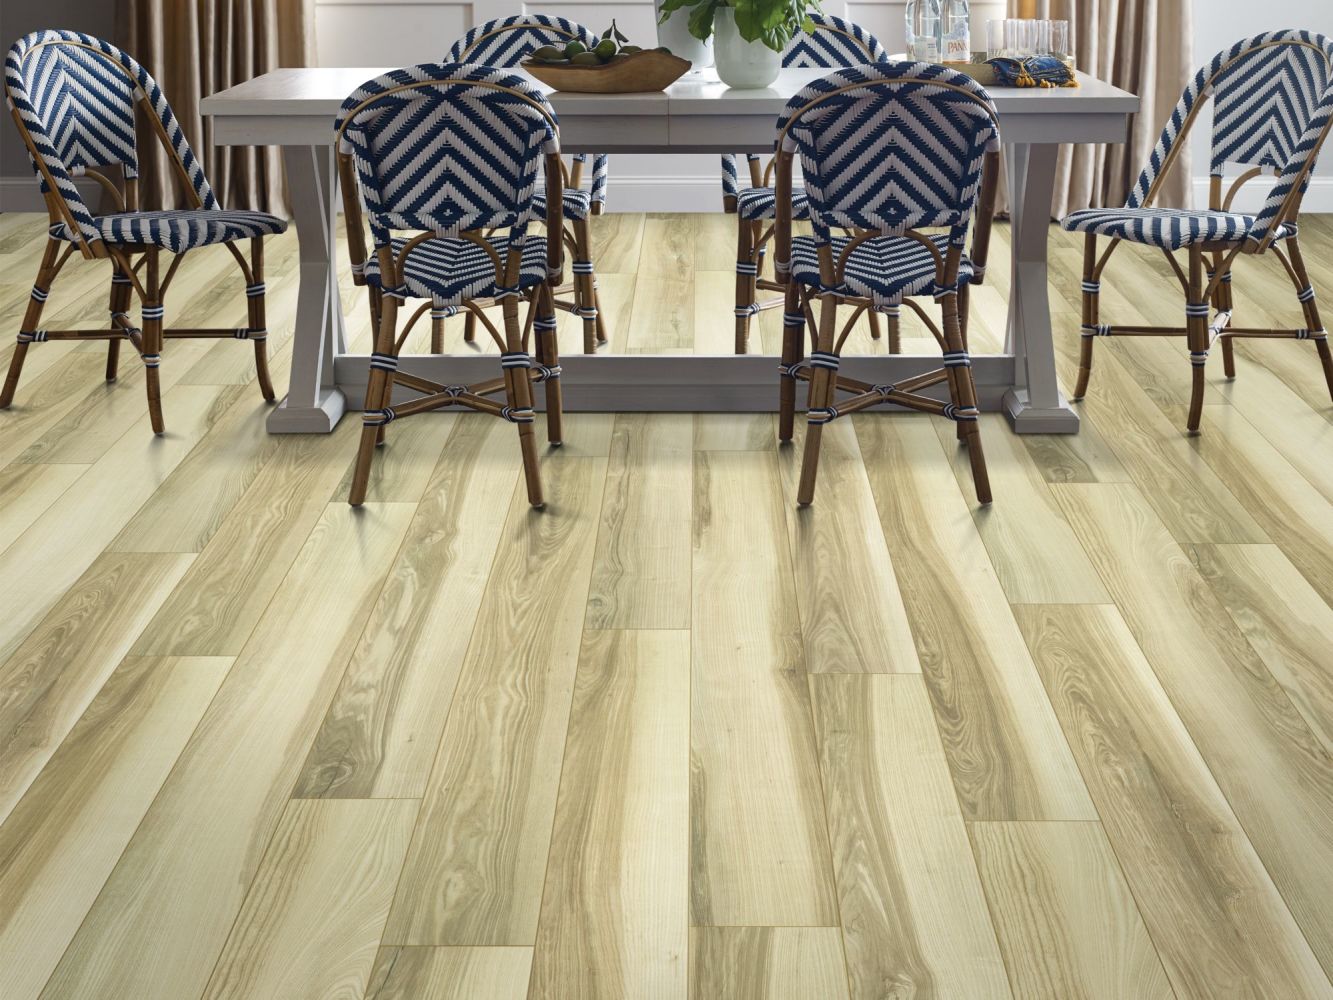 Shaw Floors Resilient Residential Paragon XL HD Plus Natural Butternut 00259_2033V